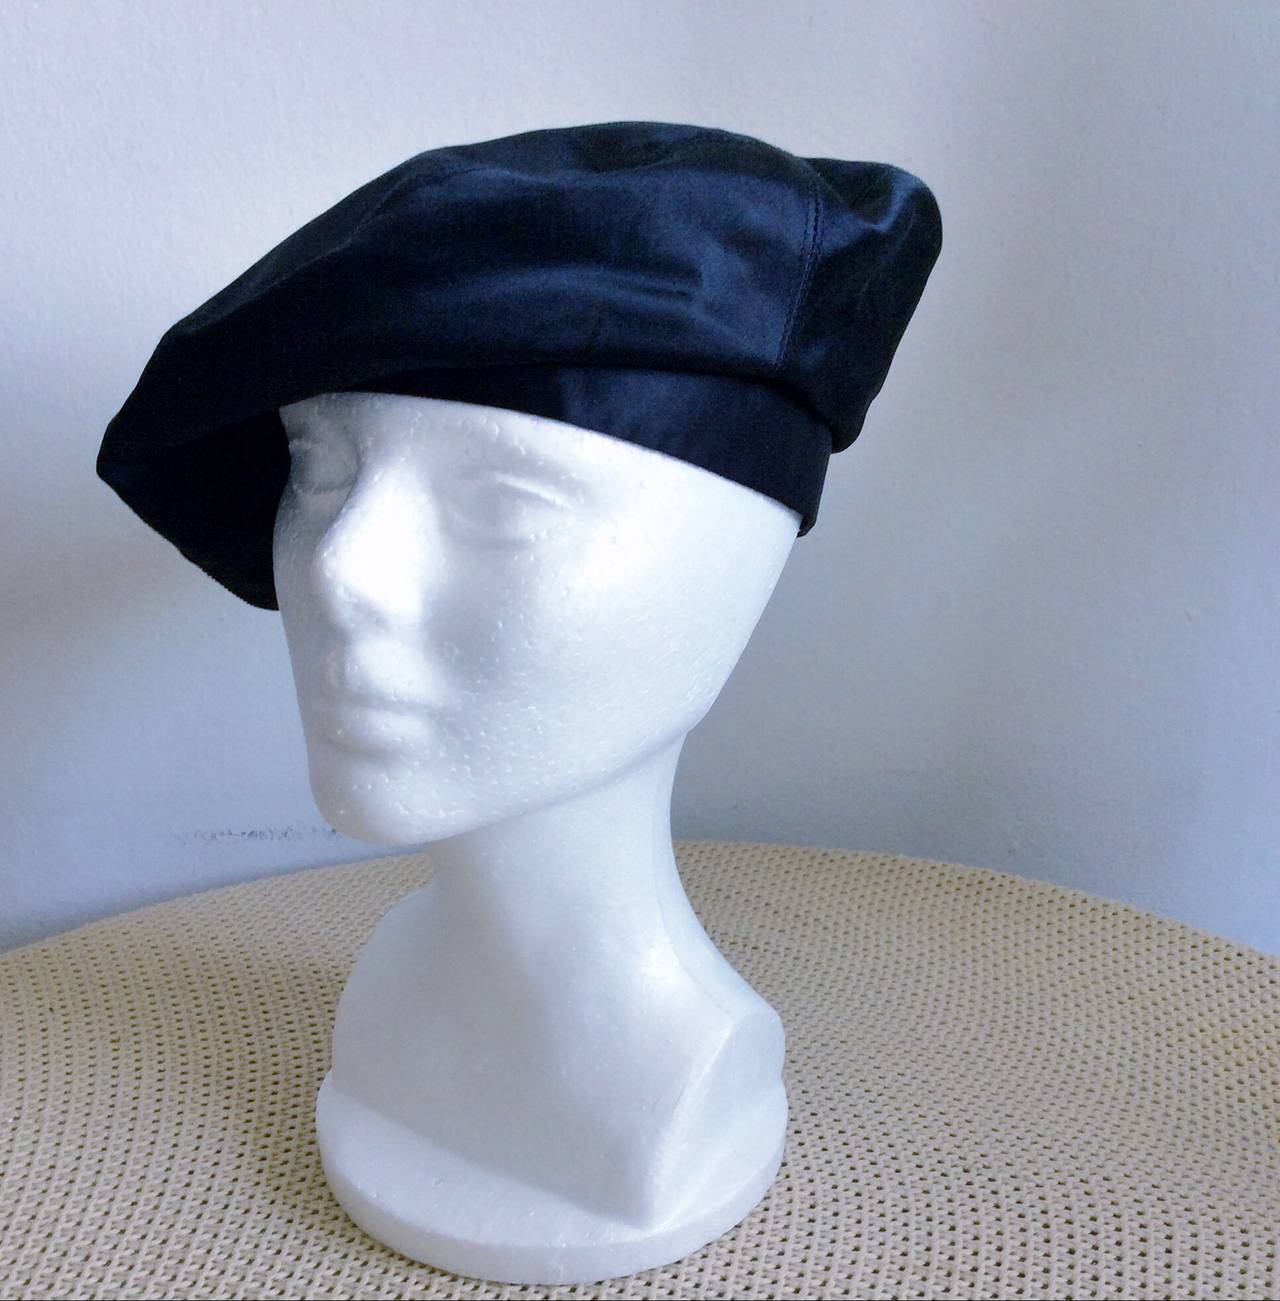 Wonderful black silk satin vintage Chanel beret! Extremely rare find, with so much style! Can easily transition from day to night. In great condition. Marked Size Medium